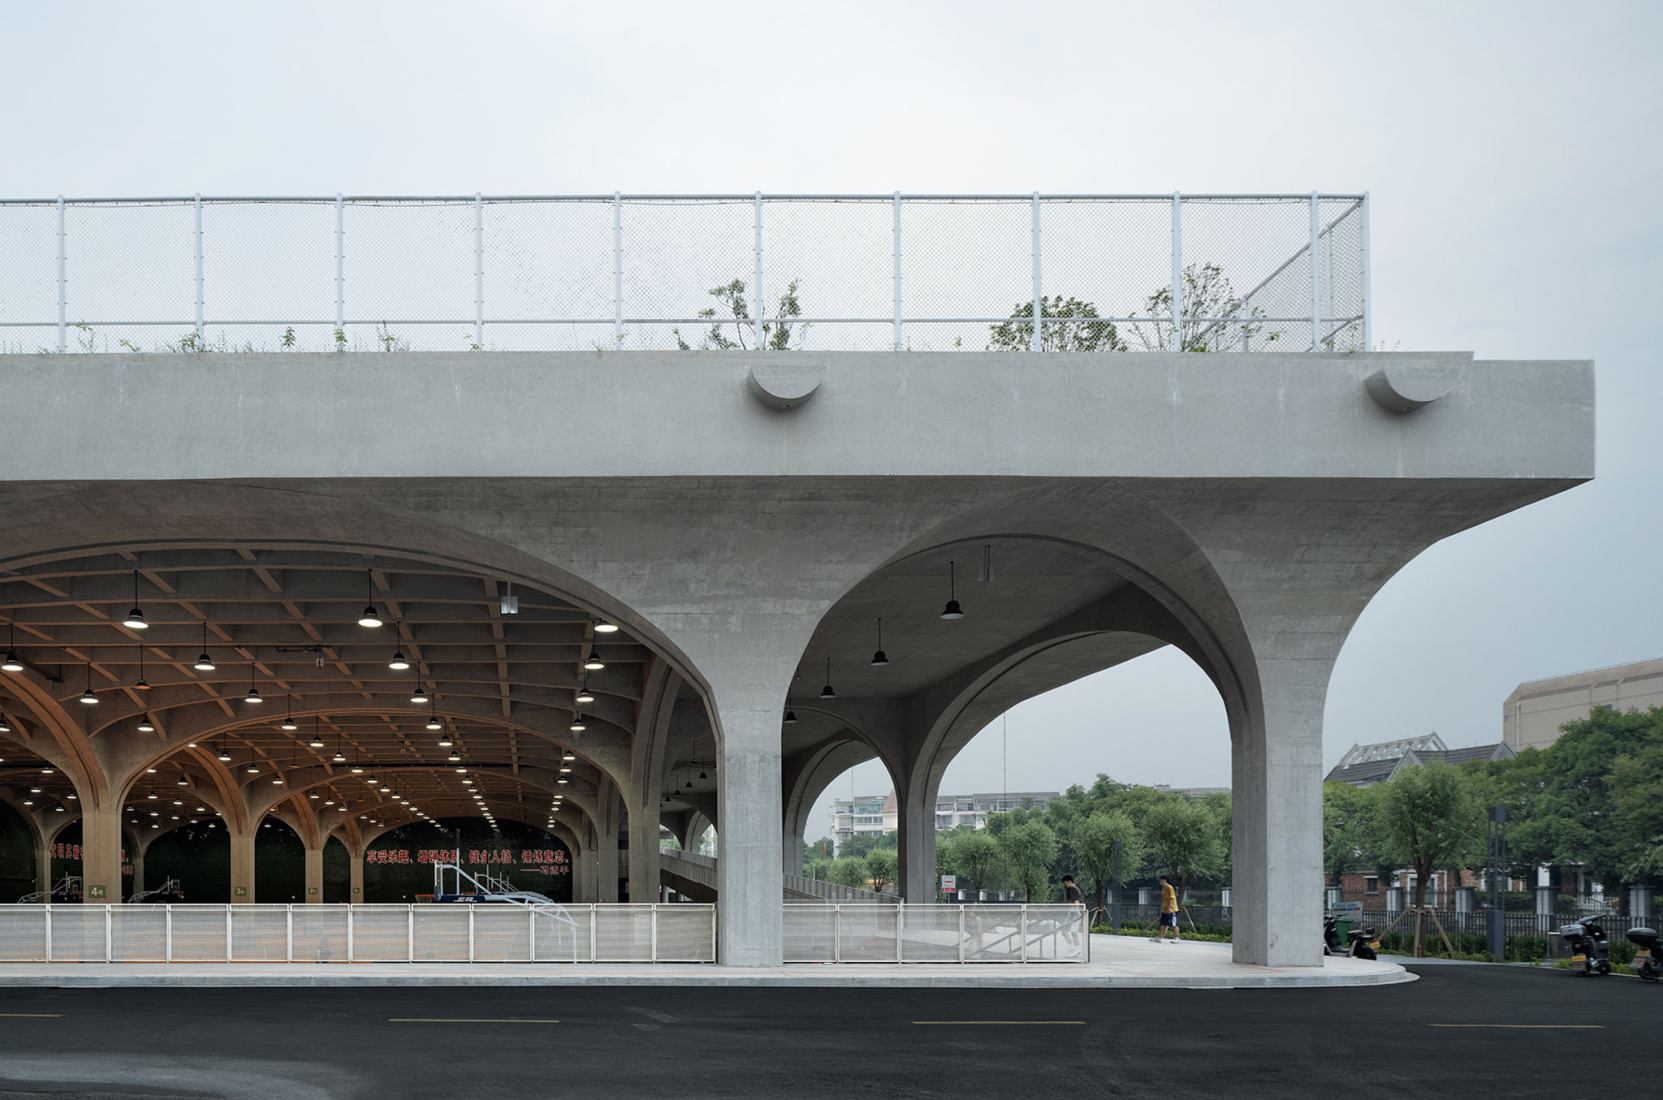 Indoor Sports Field of Shaoxing University by UAD. Photograph by Zhao Qiang.